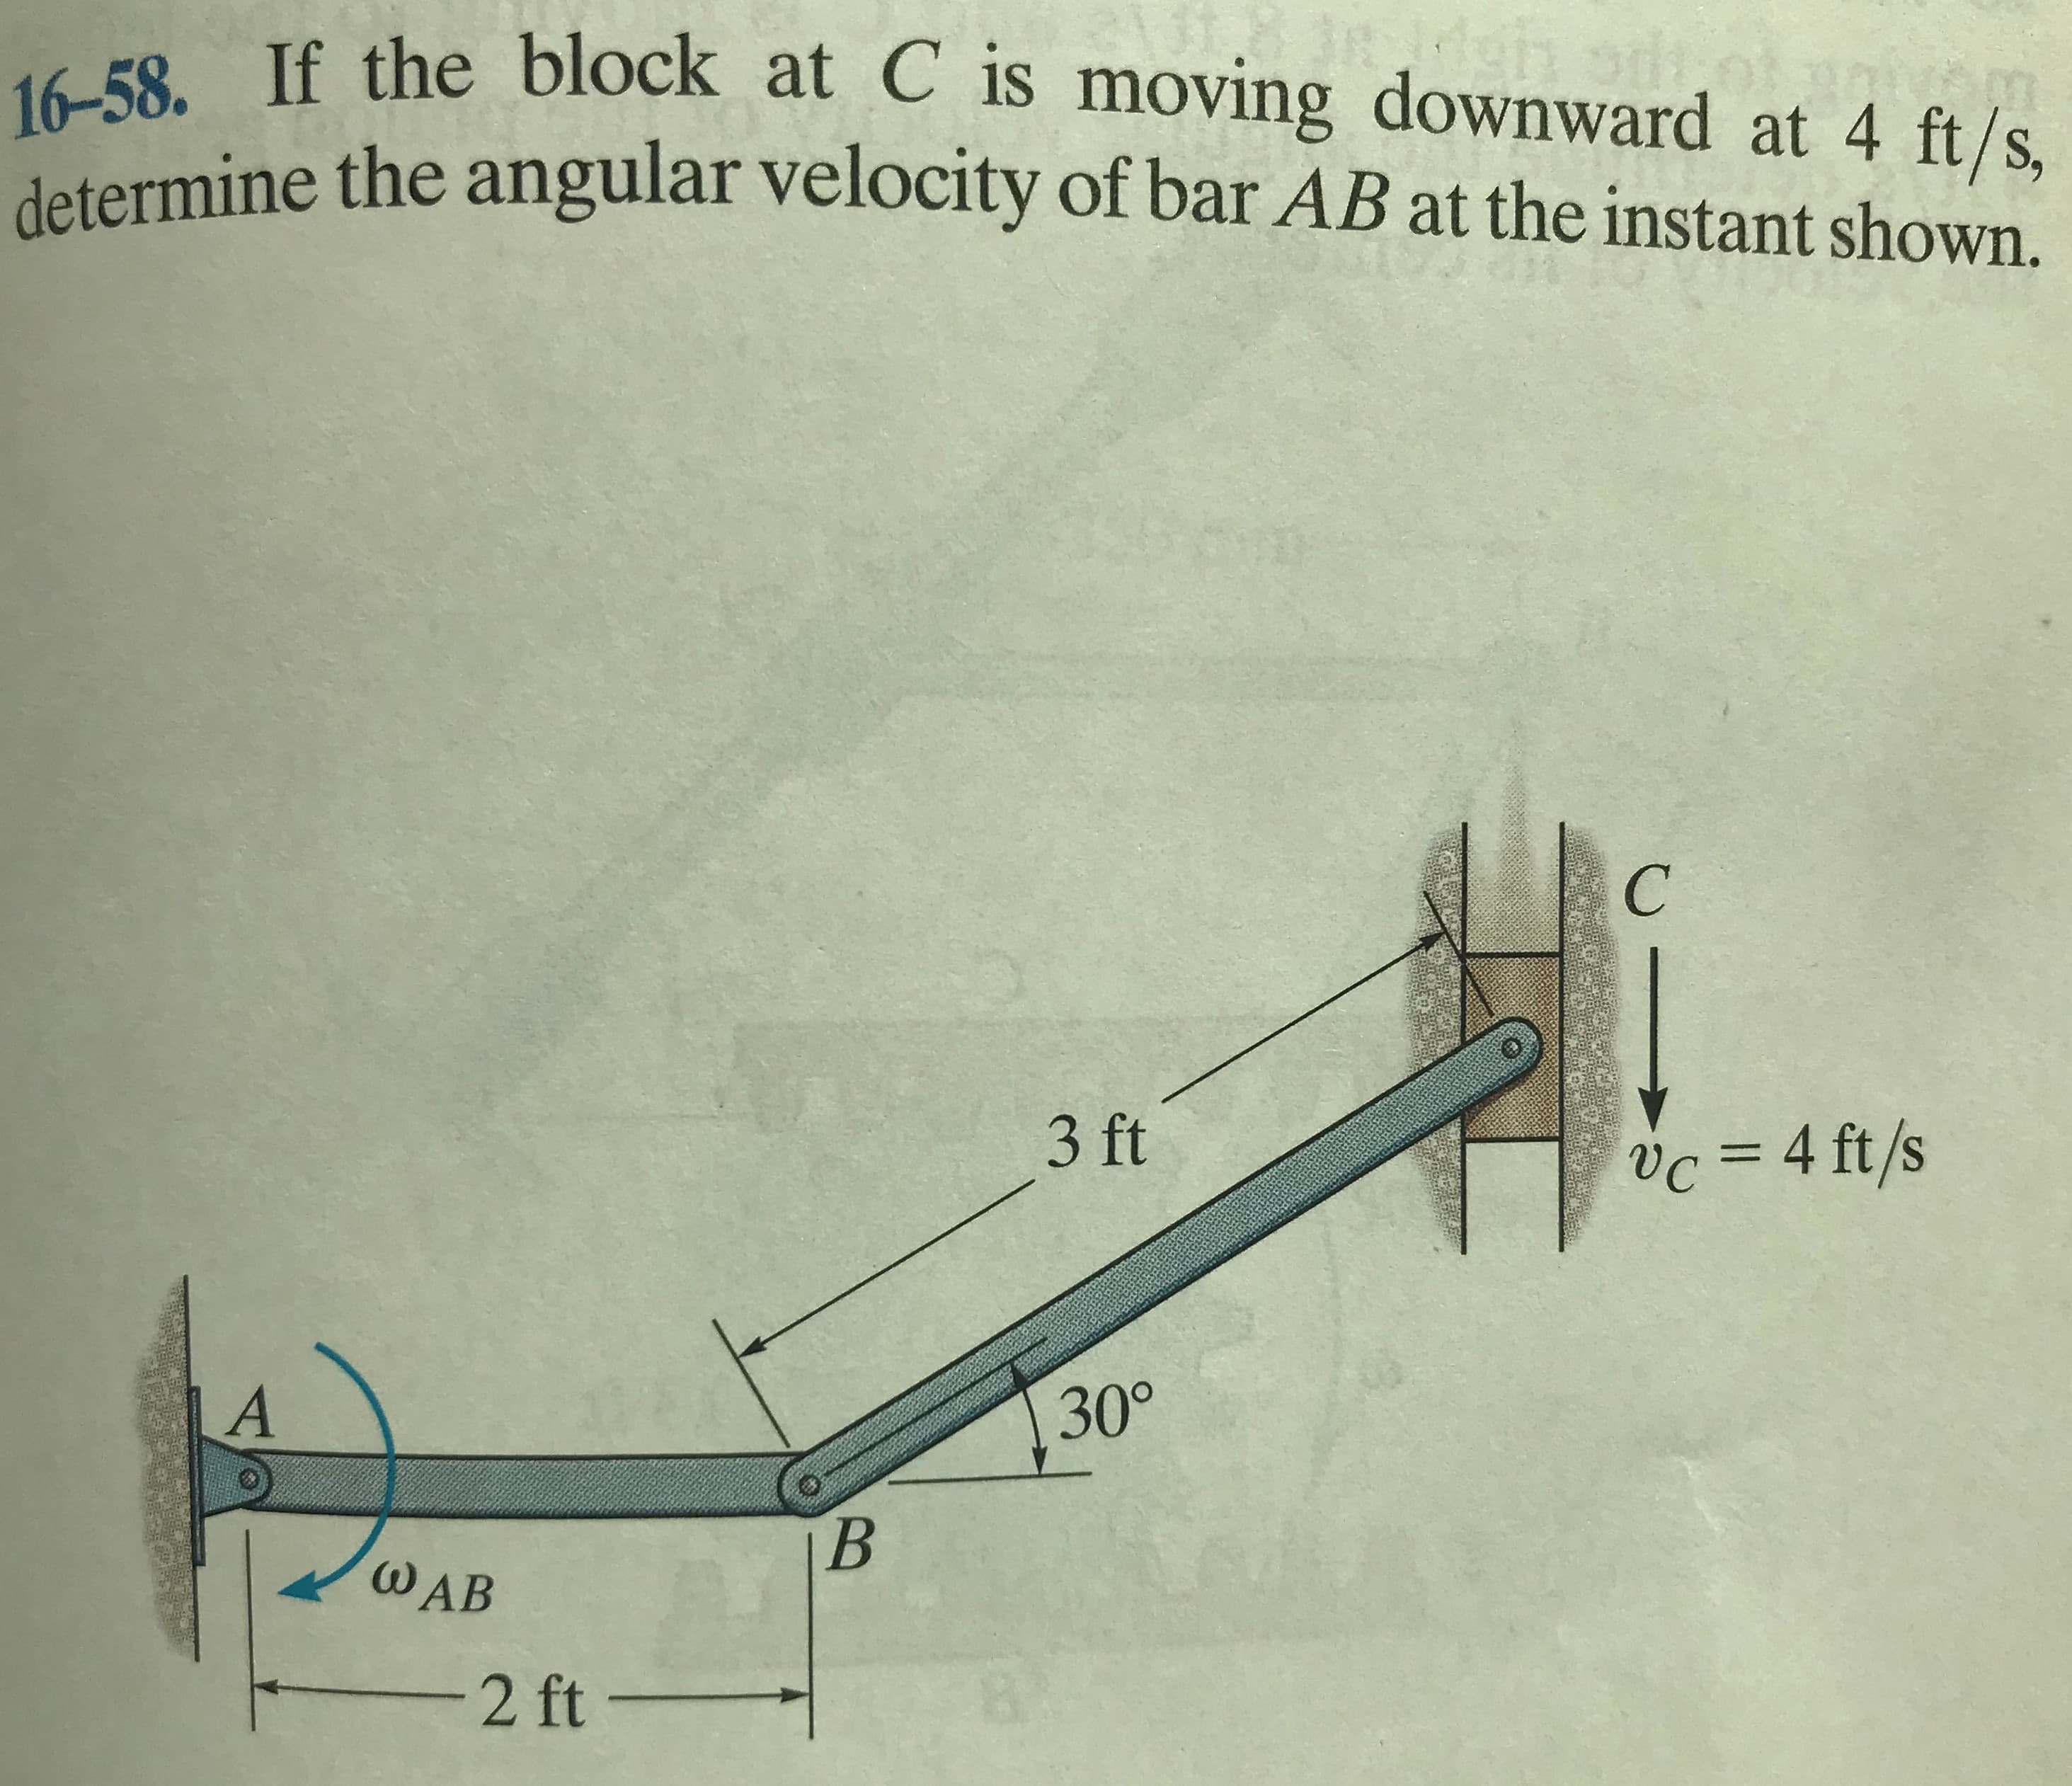 16-58. If the block at C is moving downward at 4 ft/s,
determine the angular velocity of bar AB at the instant shown.
3 ft
Vc = 4 ft/s
%3D
30°
B.
WAB
2 ft -
